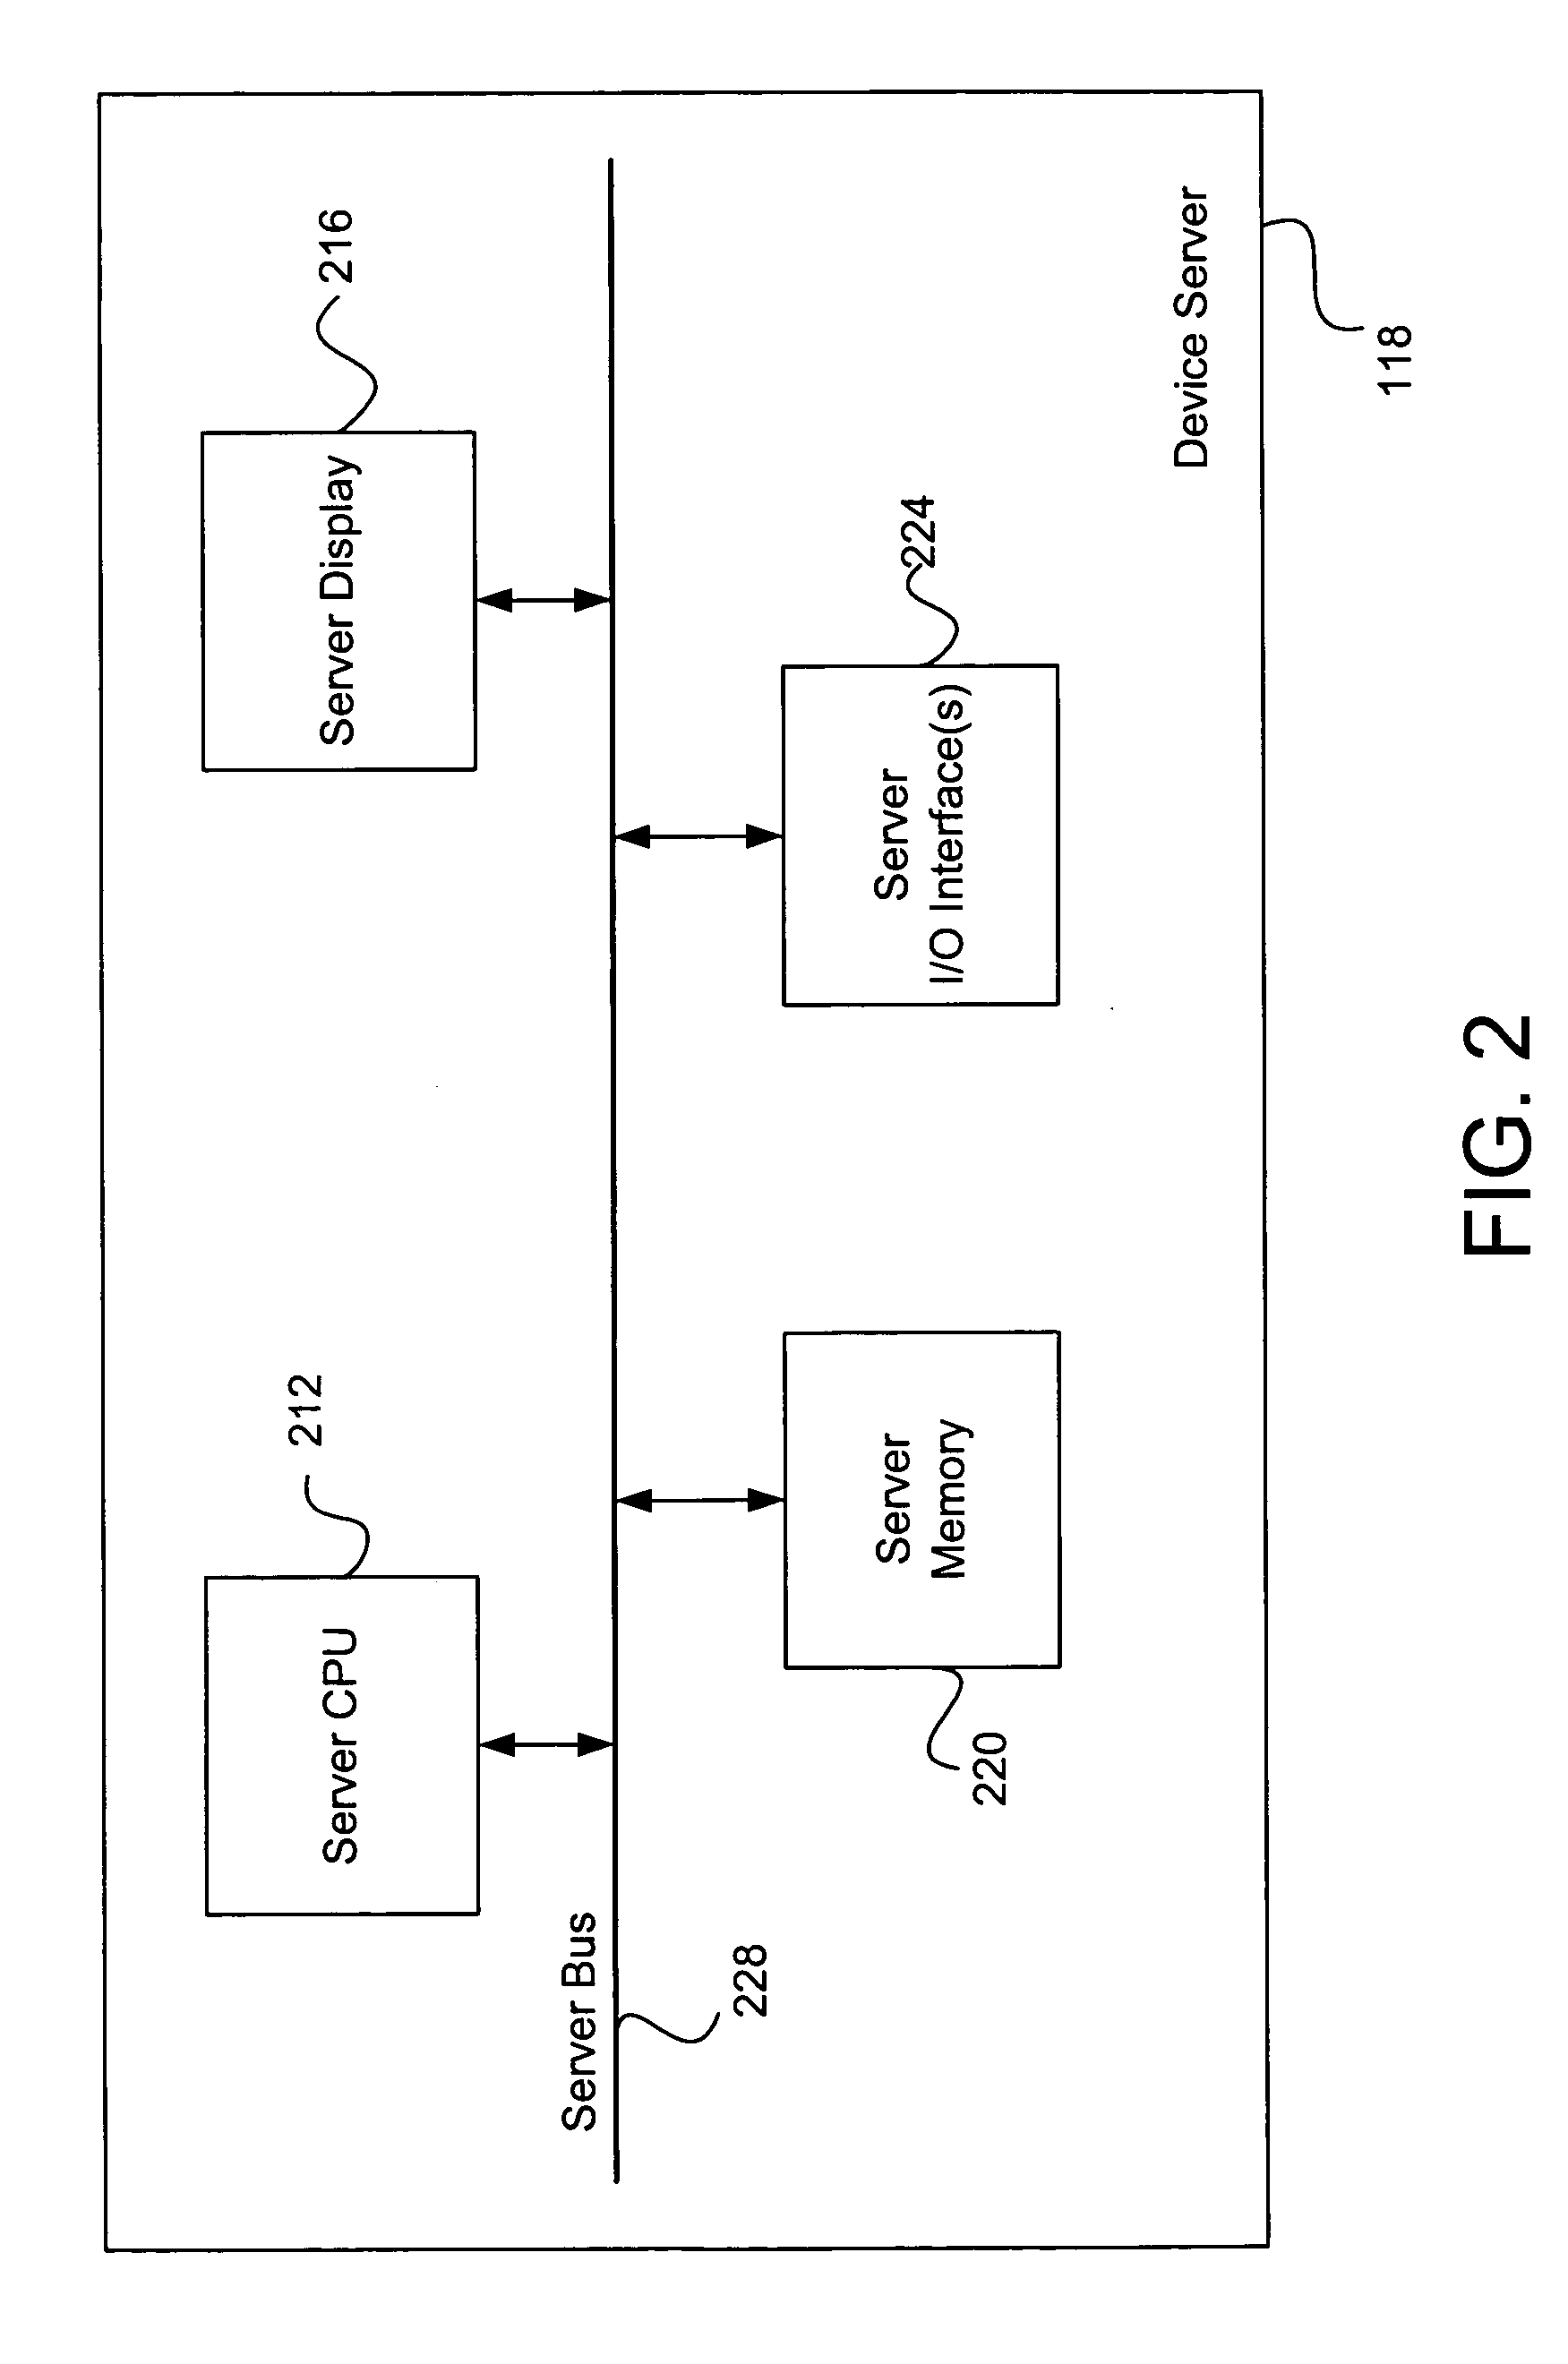 System and method for efficiently implementing processed data structures in an electronic network